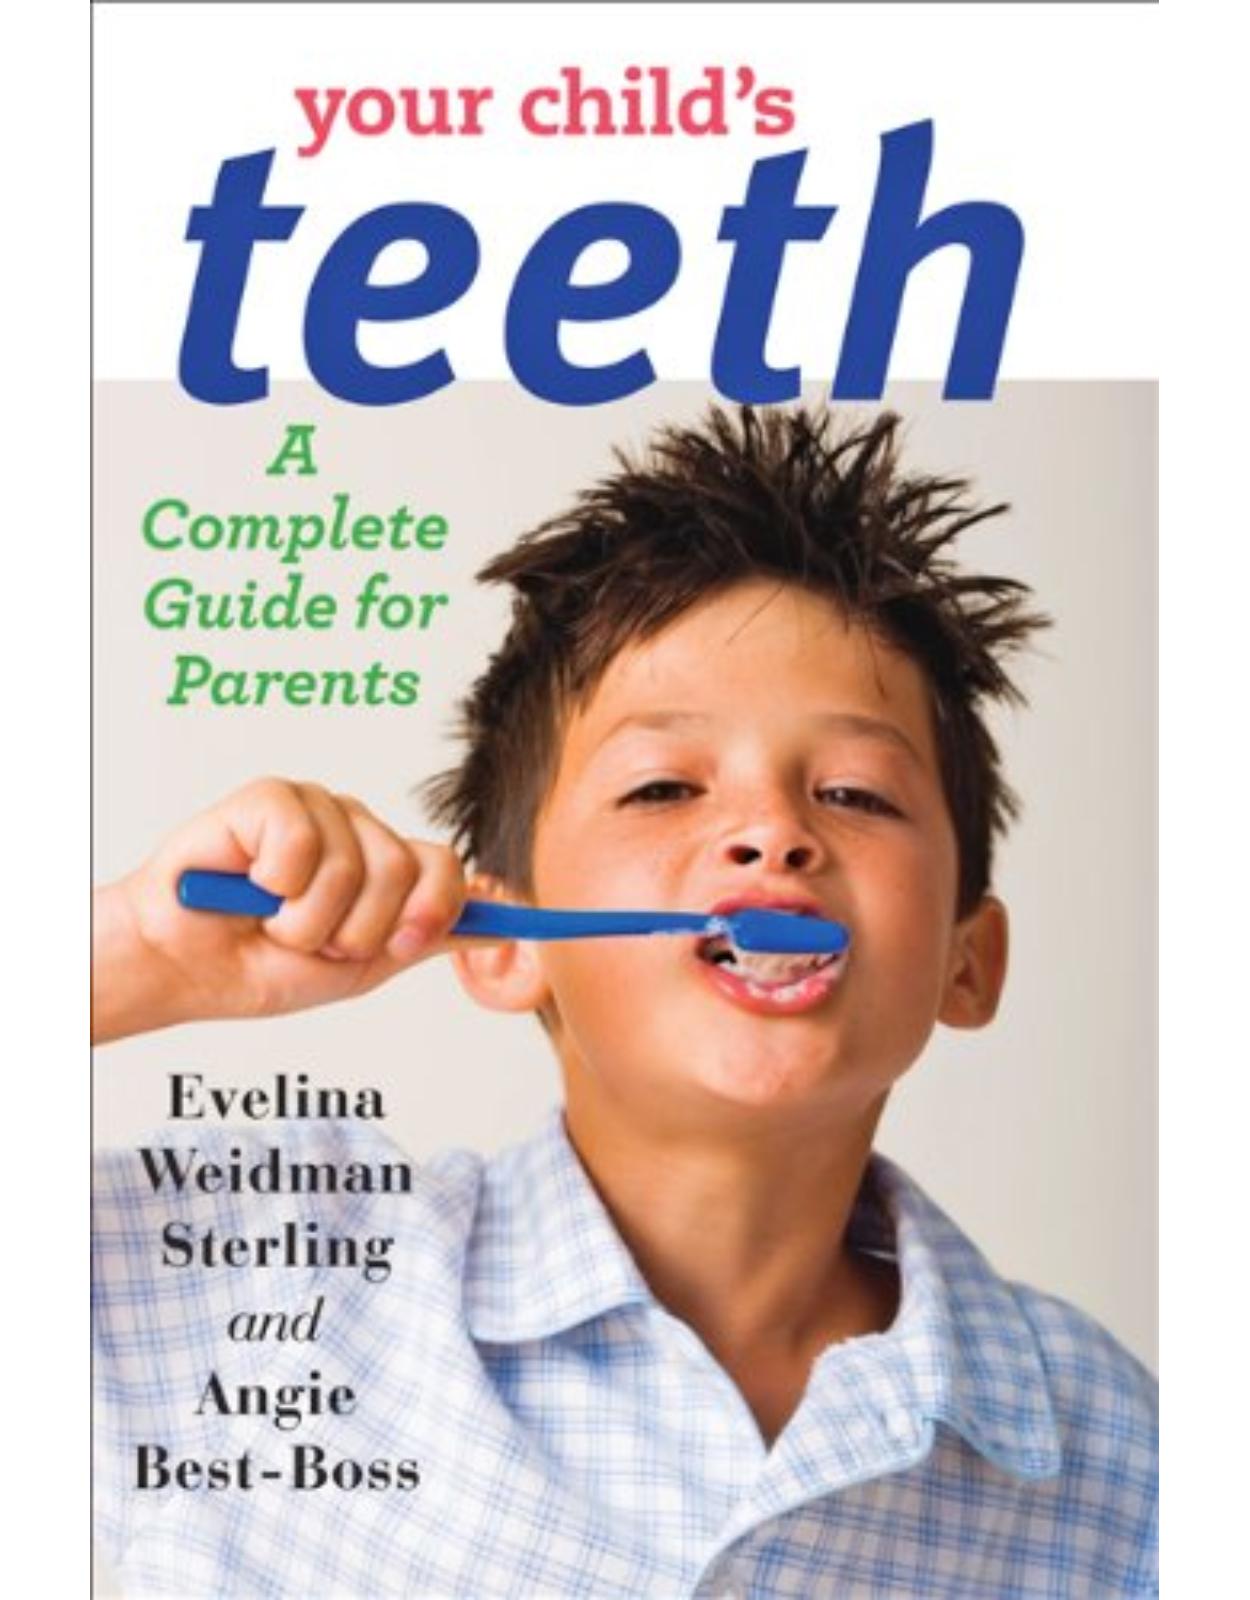 Your Child's Teeth. A Complete Guide for Parents